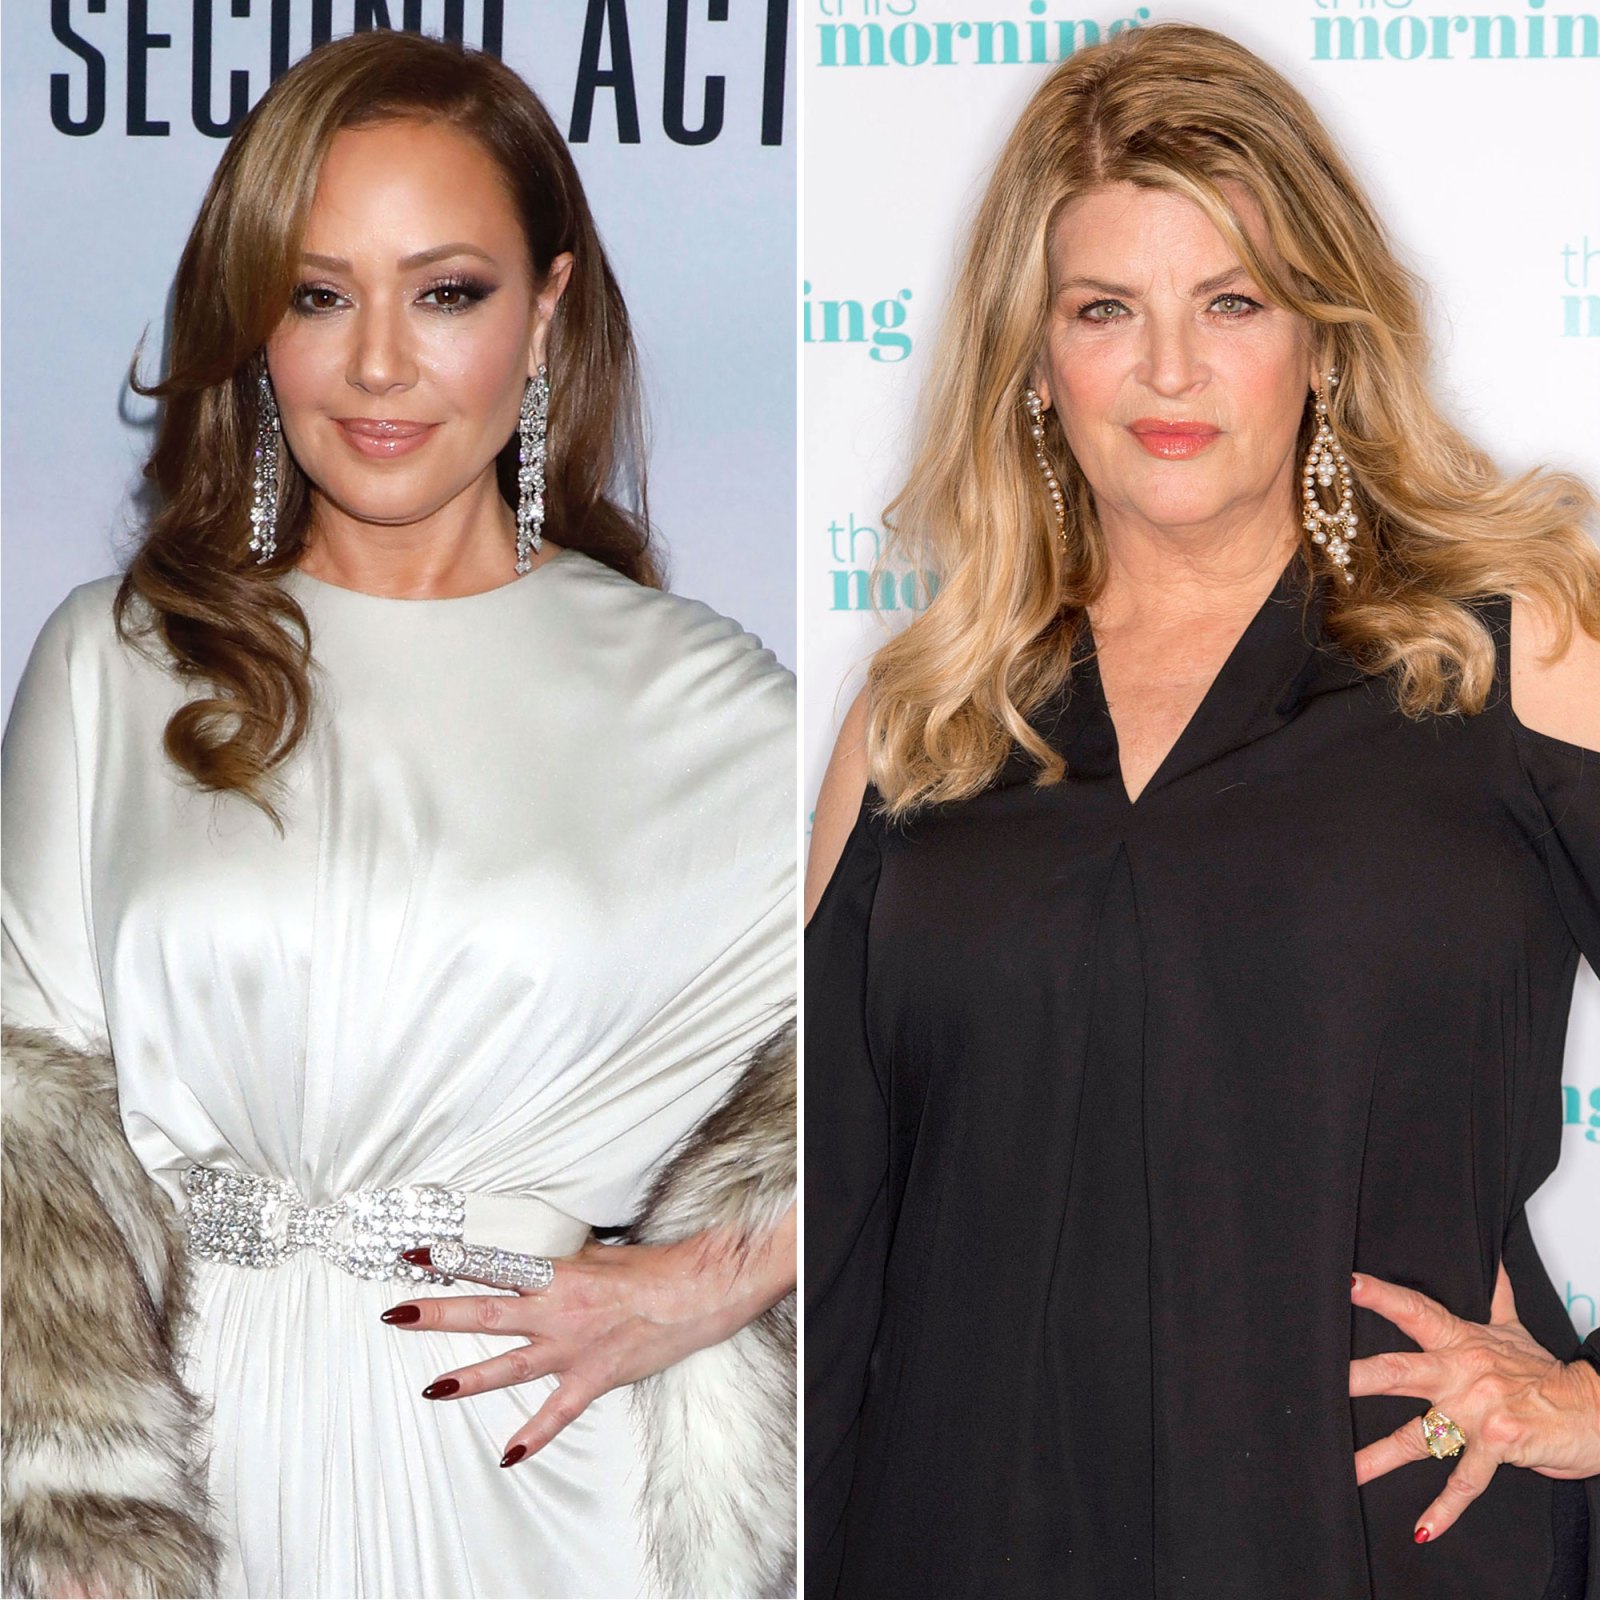 Leah Remini and Kirstie Alley Feud Inside Their Ups and Downs Over Scientology and More